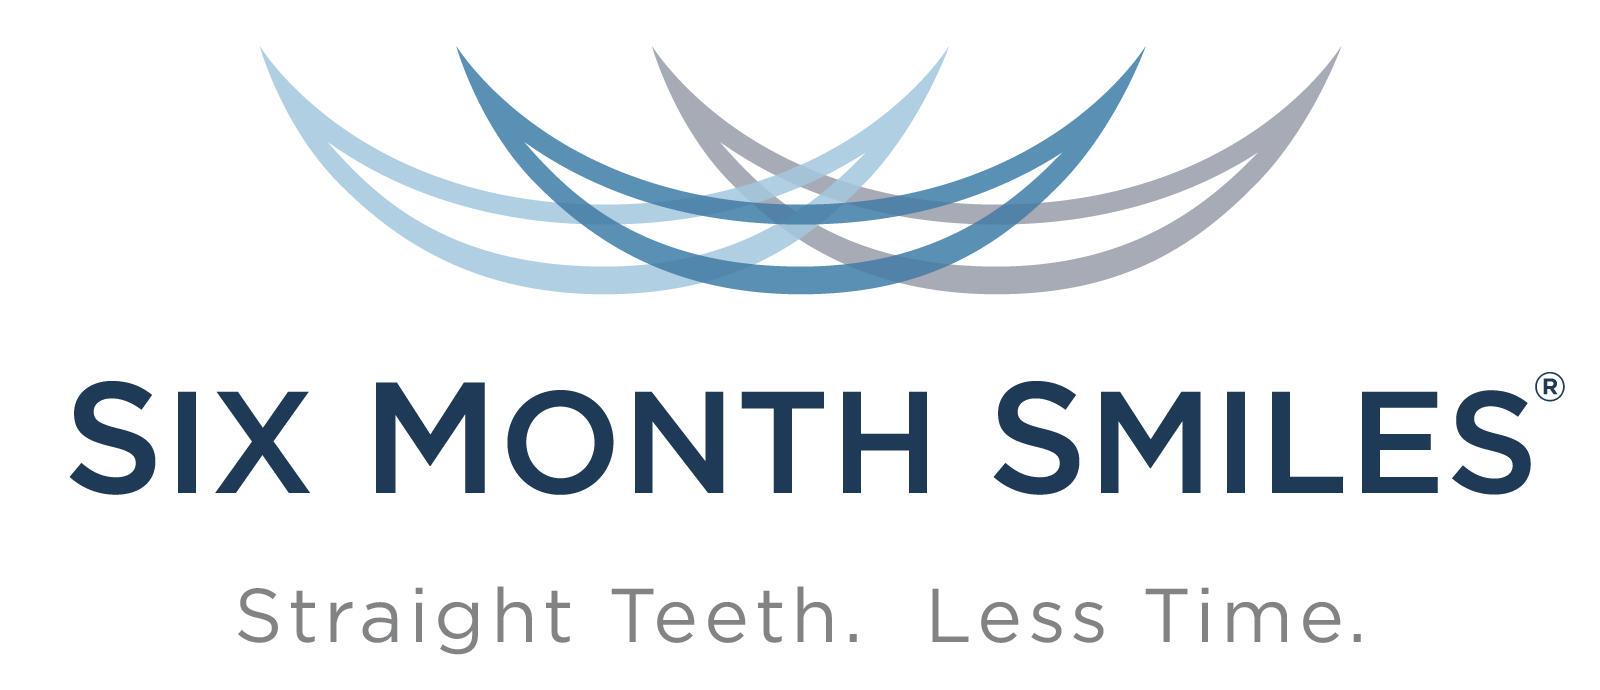 Six Month Smiles. Straight teeth. Less time.